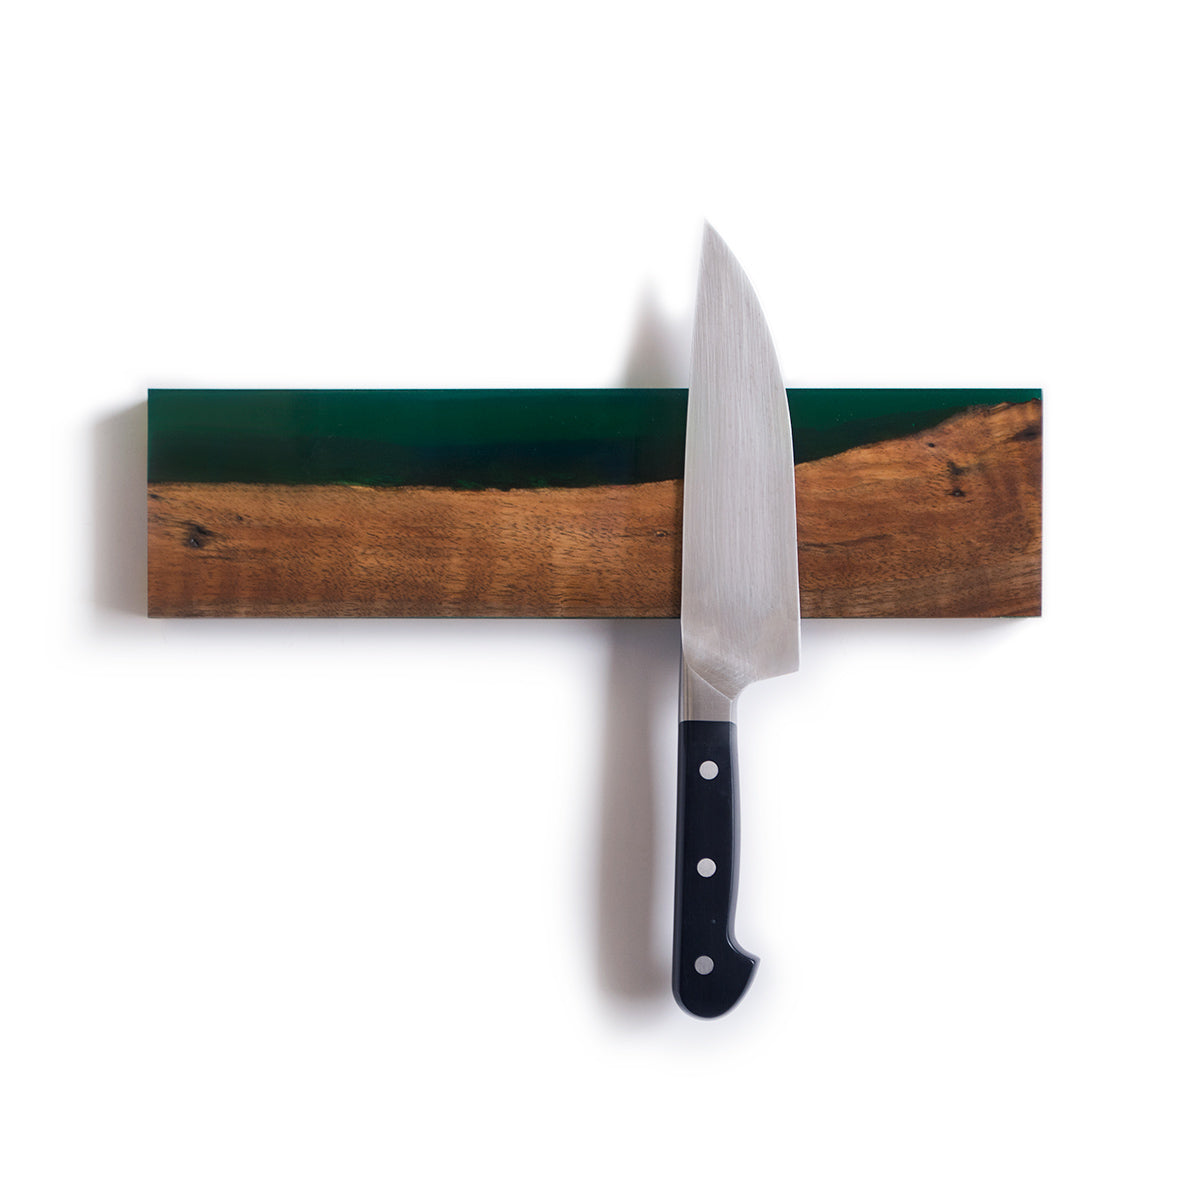 wooden magnetic knife holder made from salvaged live edge walnut wood and translucent green epoxy resin